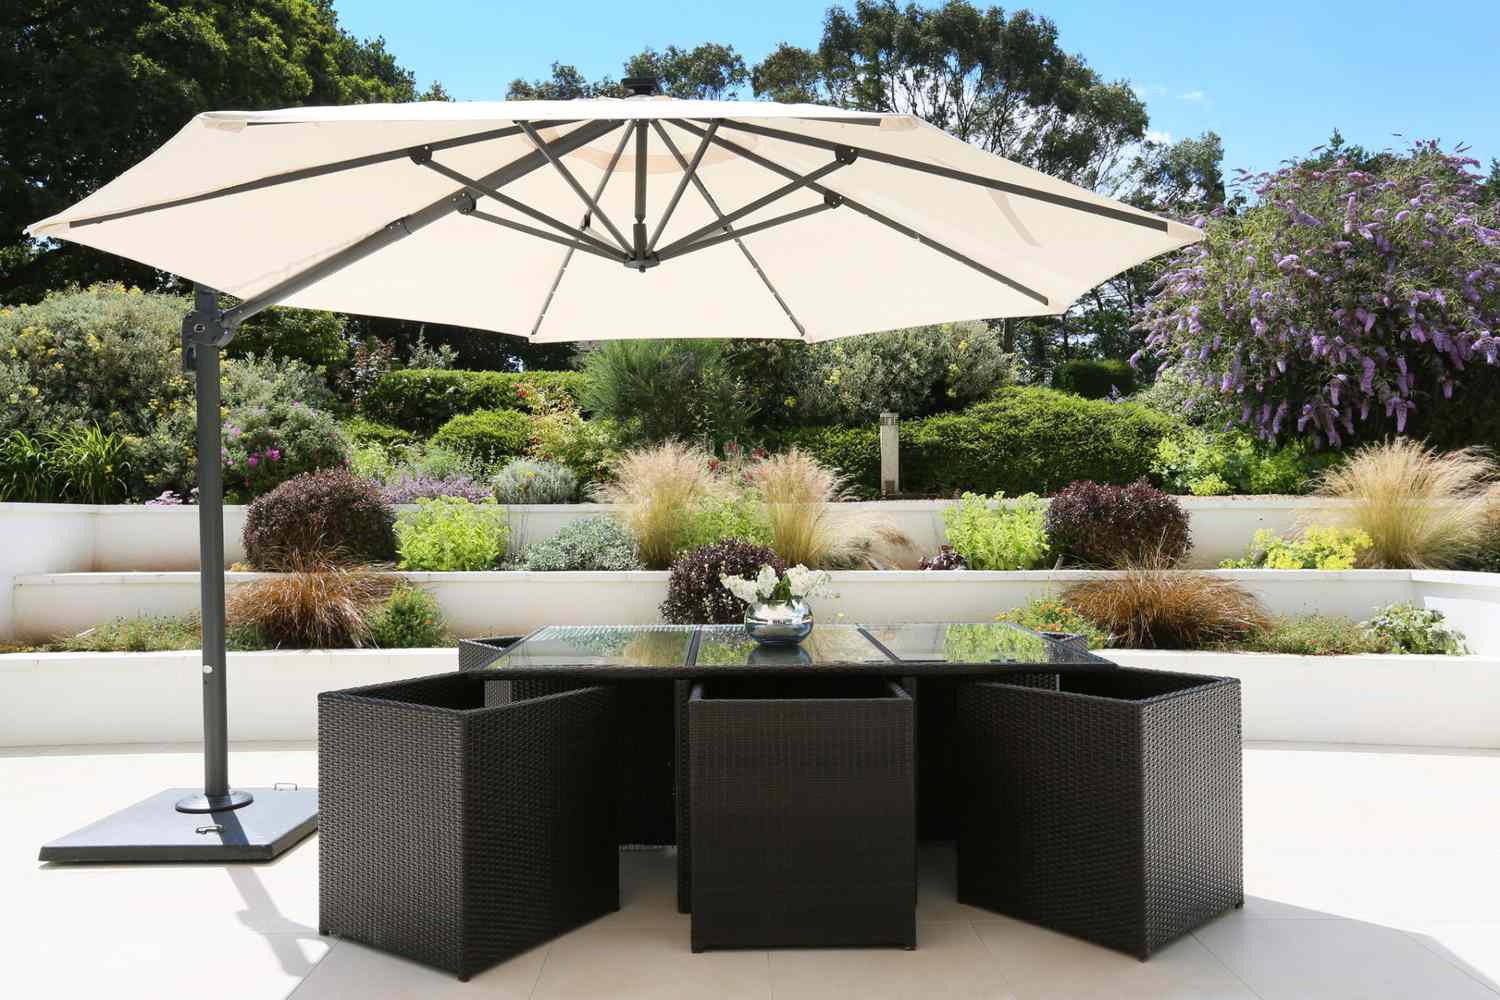 A cantilevered ivory-colored umbrella over a seating space on a patio